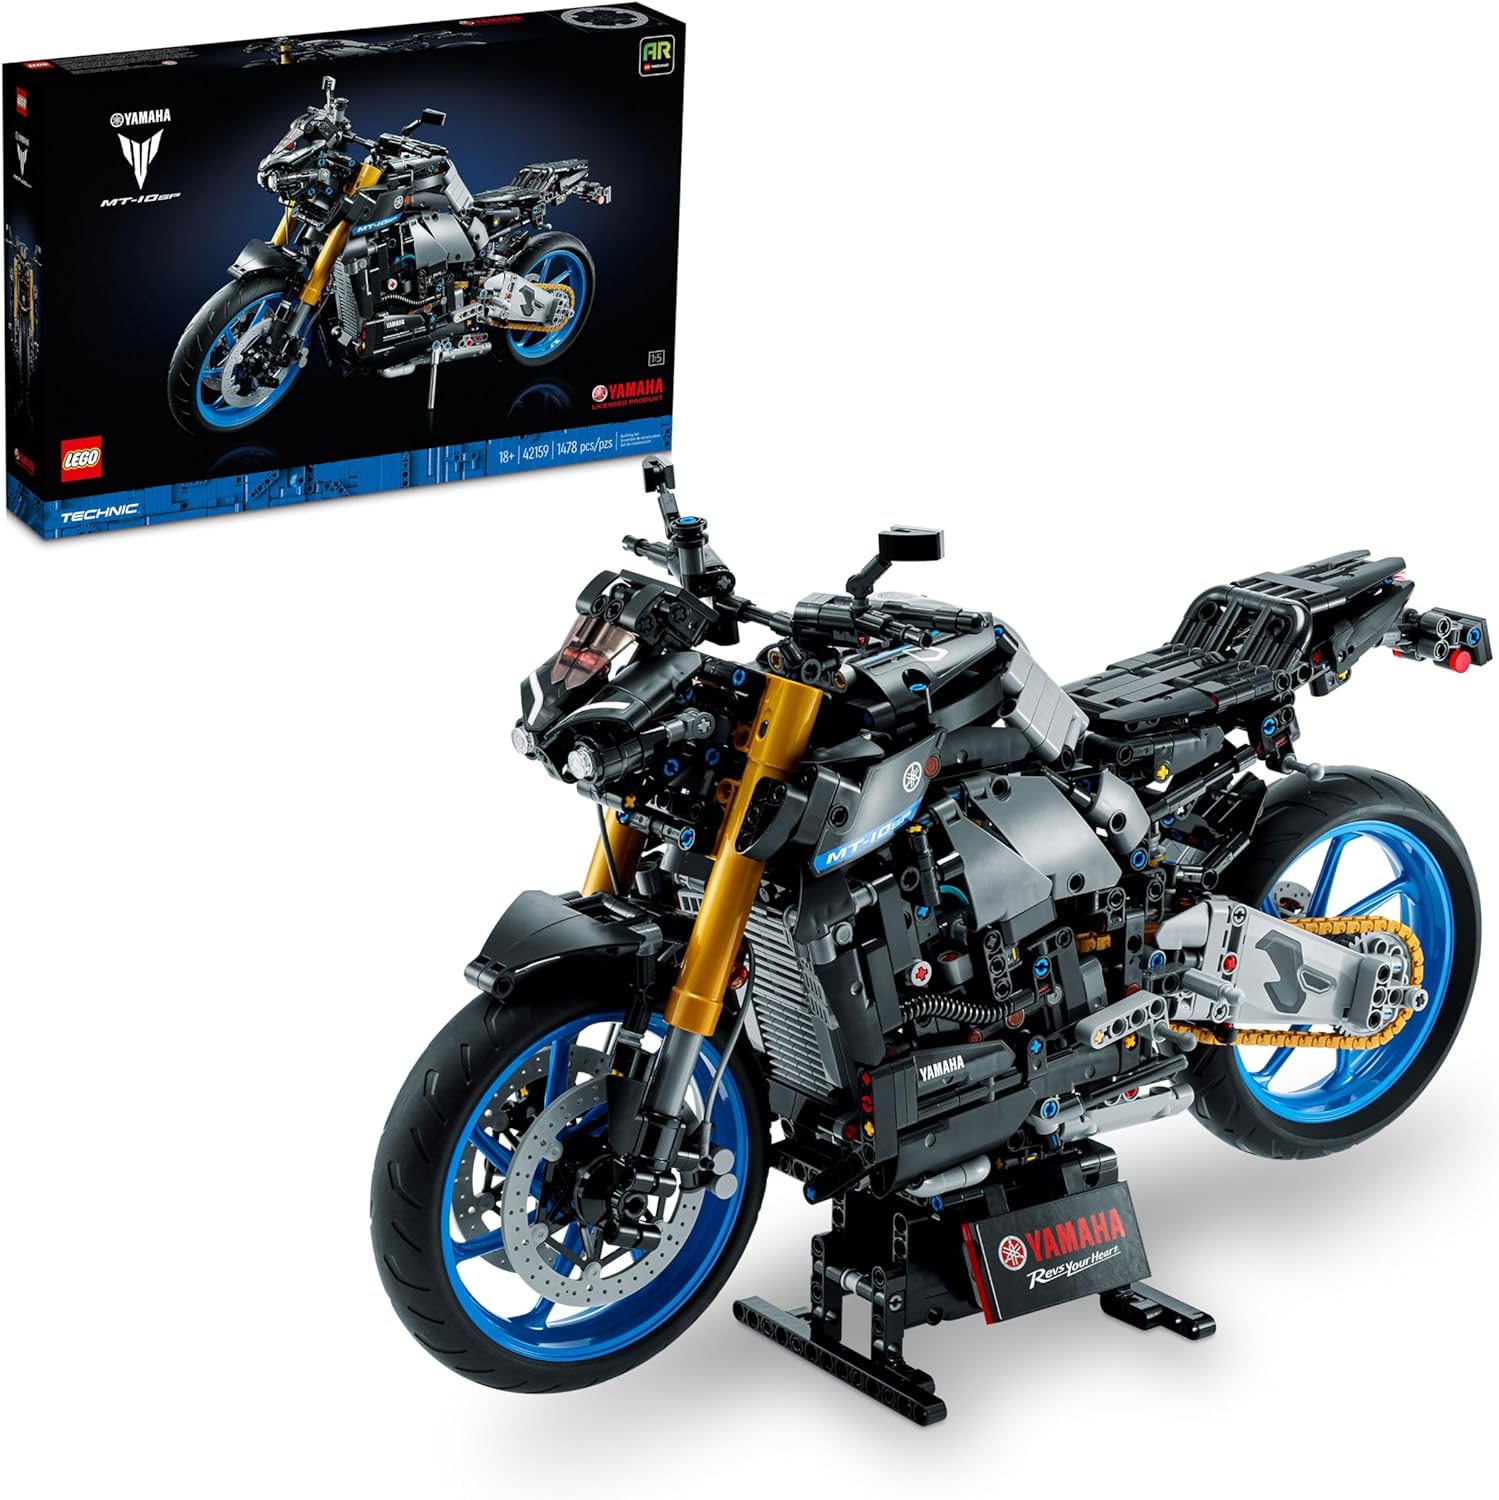 LEGO Technic Yamaha MT-10 SP 42159 Advanced Building Set for Adults - Iconic Motorcycle Model for Bu